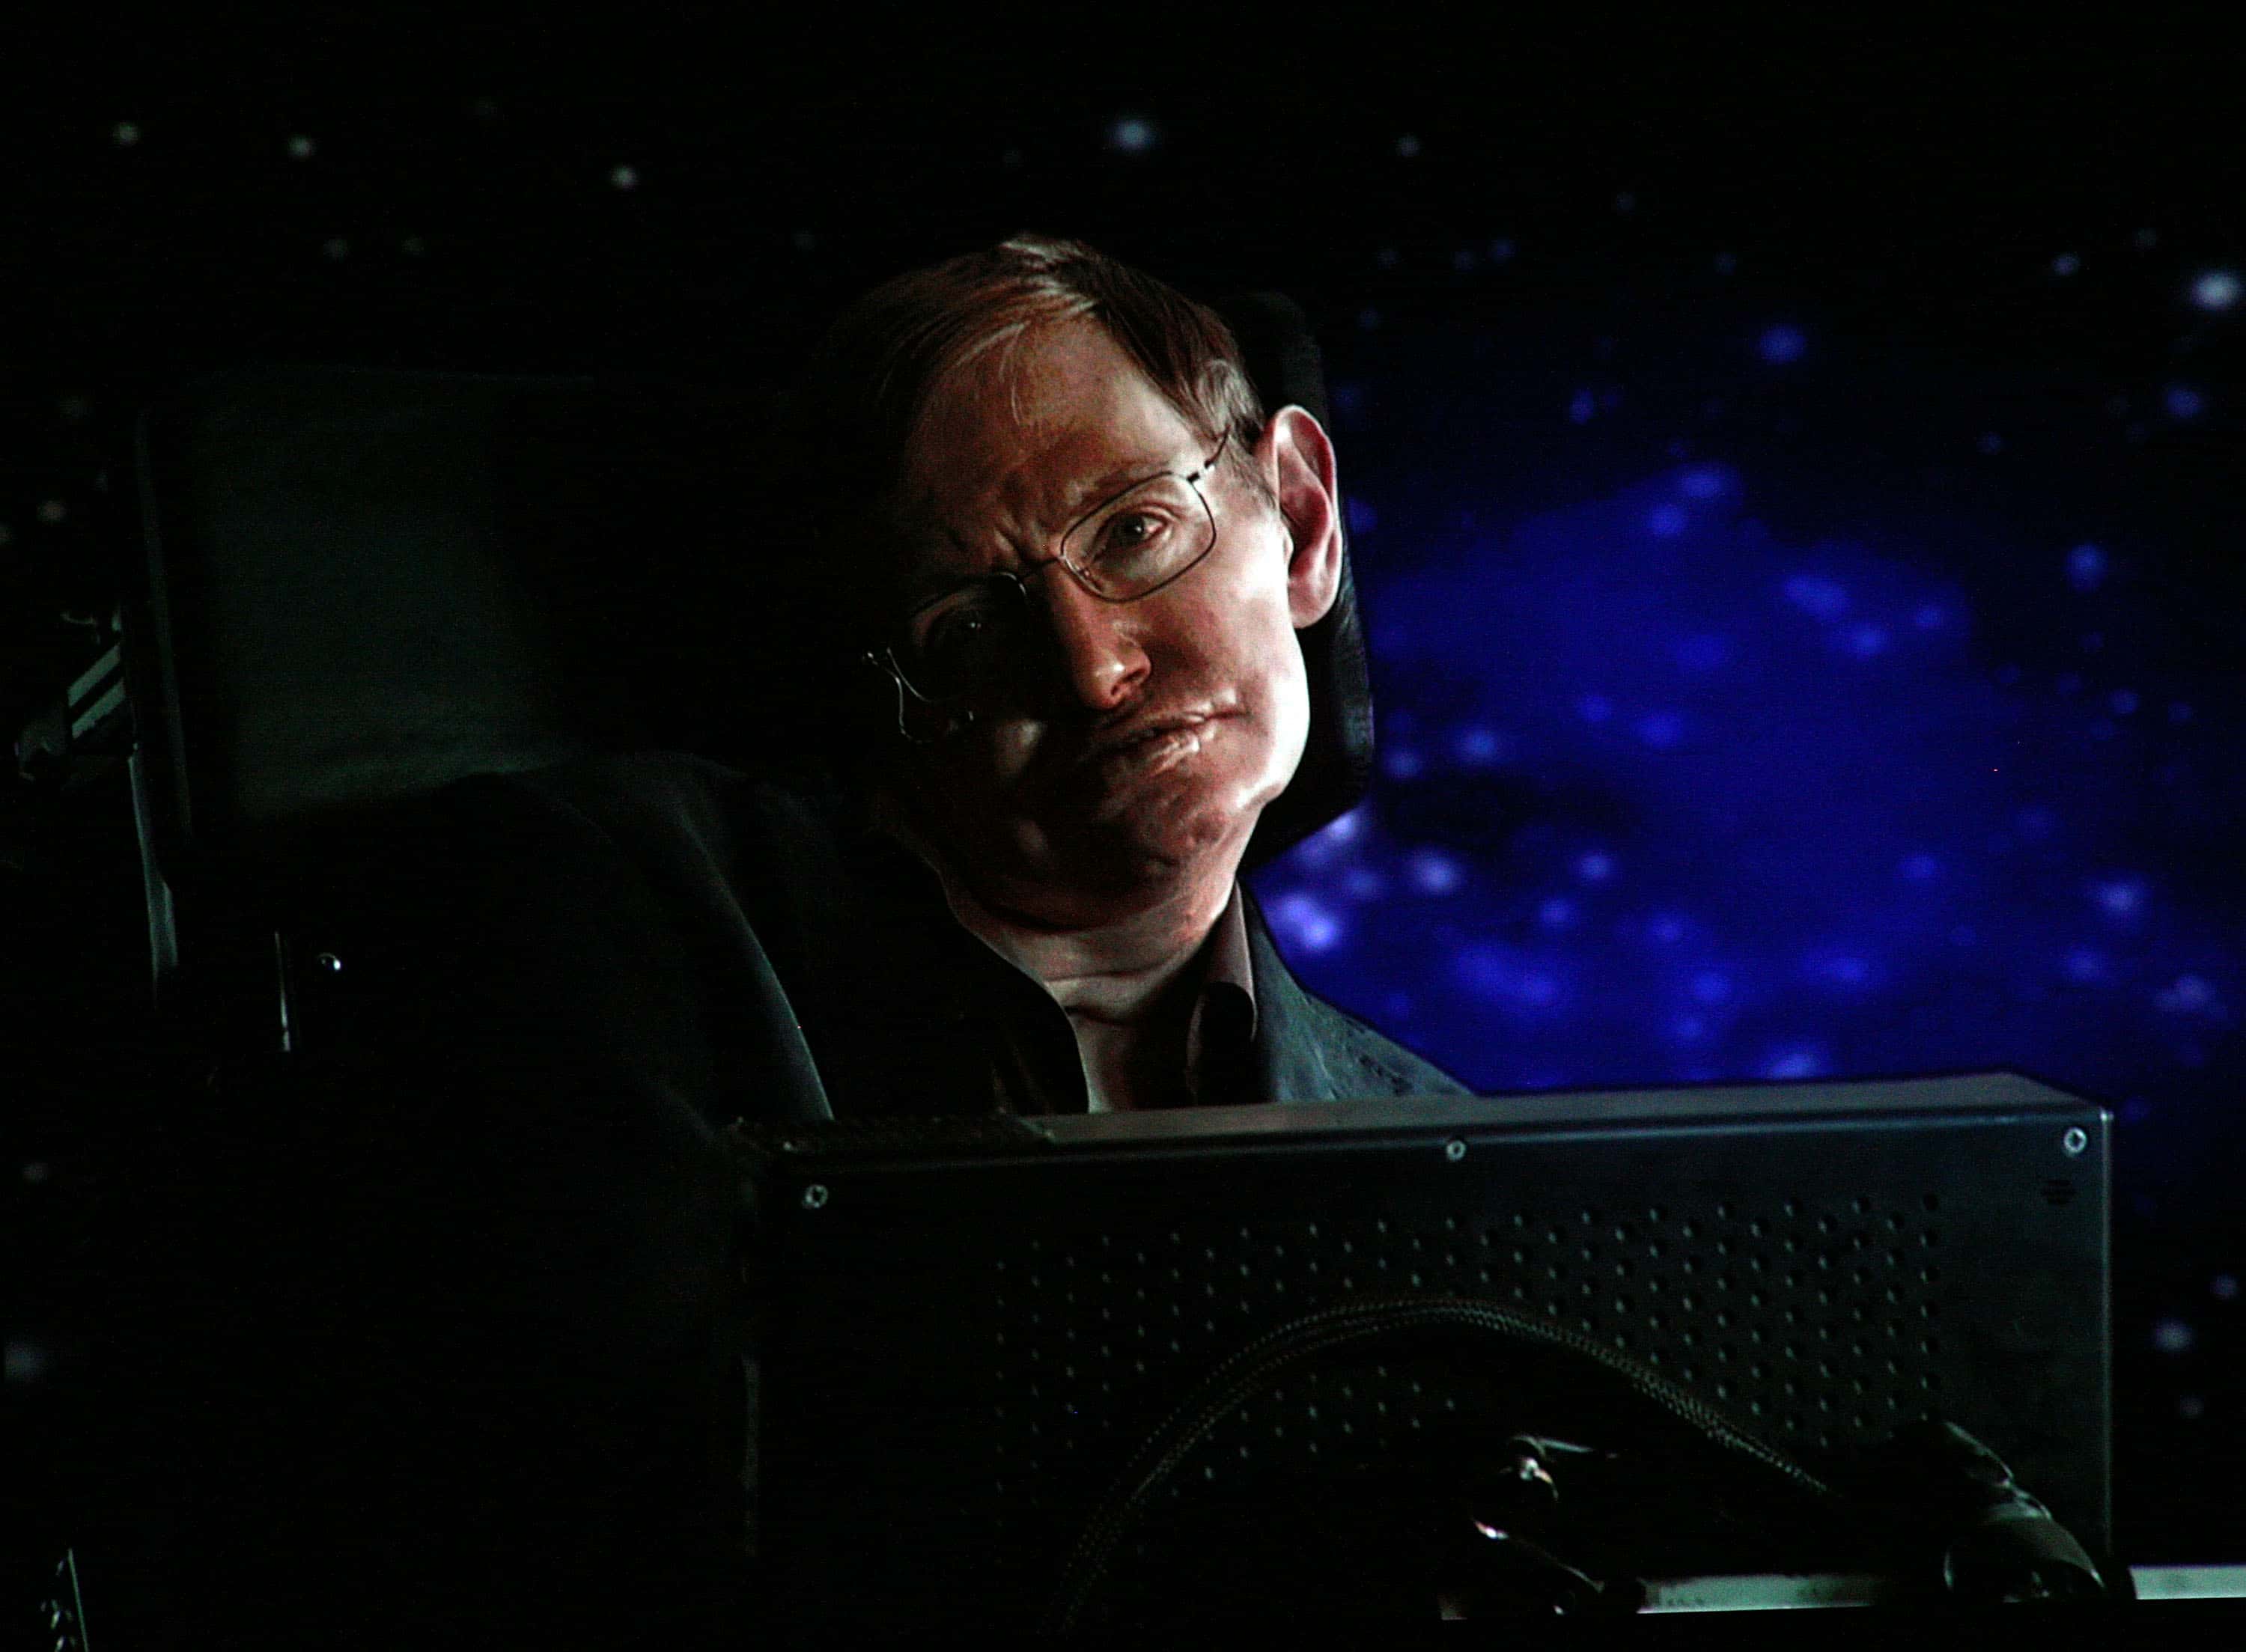 <p>Stephen Hawking is the only person to have appeared on <em>Star Trek</em> playing himself! Well, technically he played a hologram of himself: In <em>Star Trek: The Next Generation</em>, Data is shown playing poker with holographic versions of Hawking, Sir Isaac Newton, and Alfred Einstein. When given a tour of the set, Hawking paused at the “warp core” and remarked, “I’m working on that.”</p>